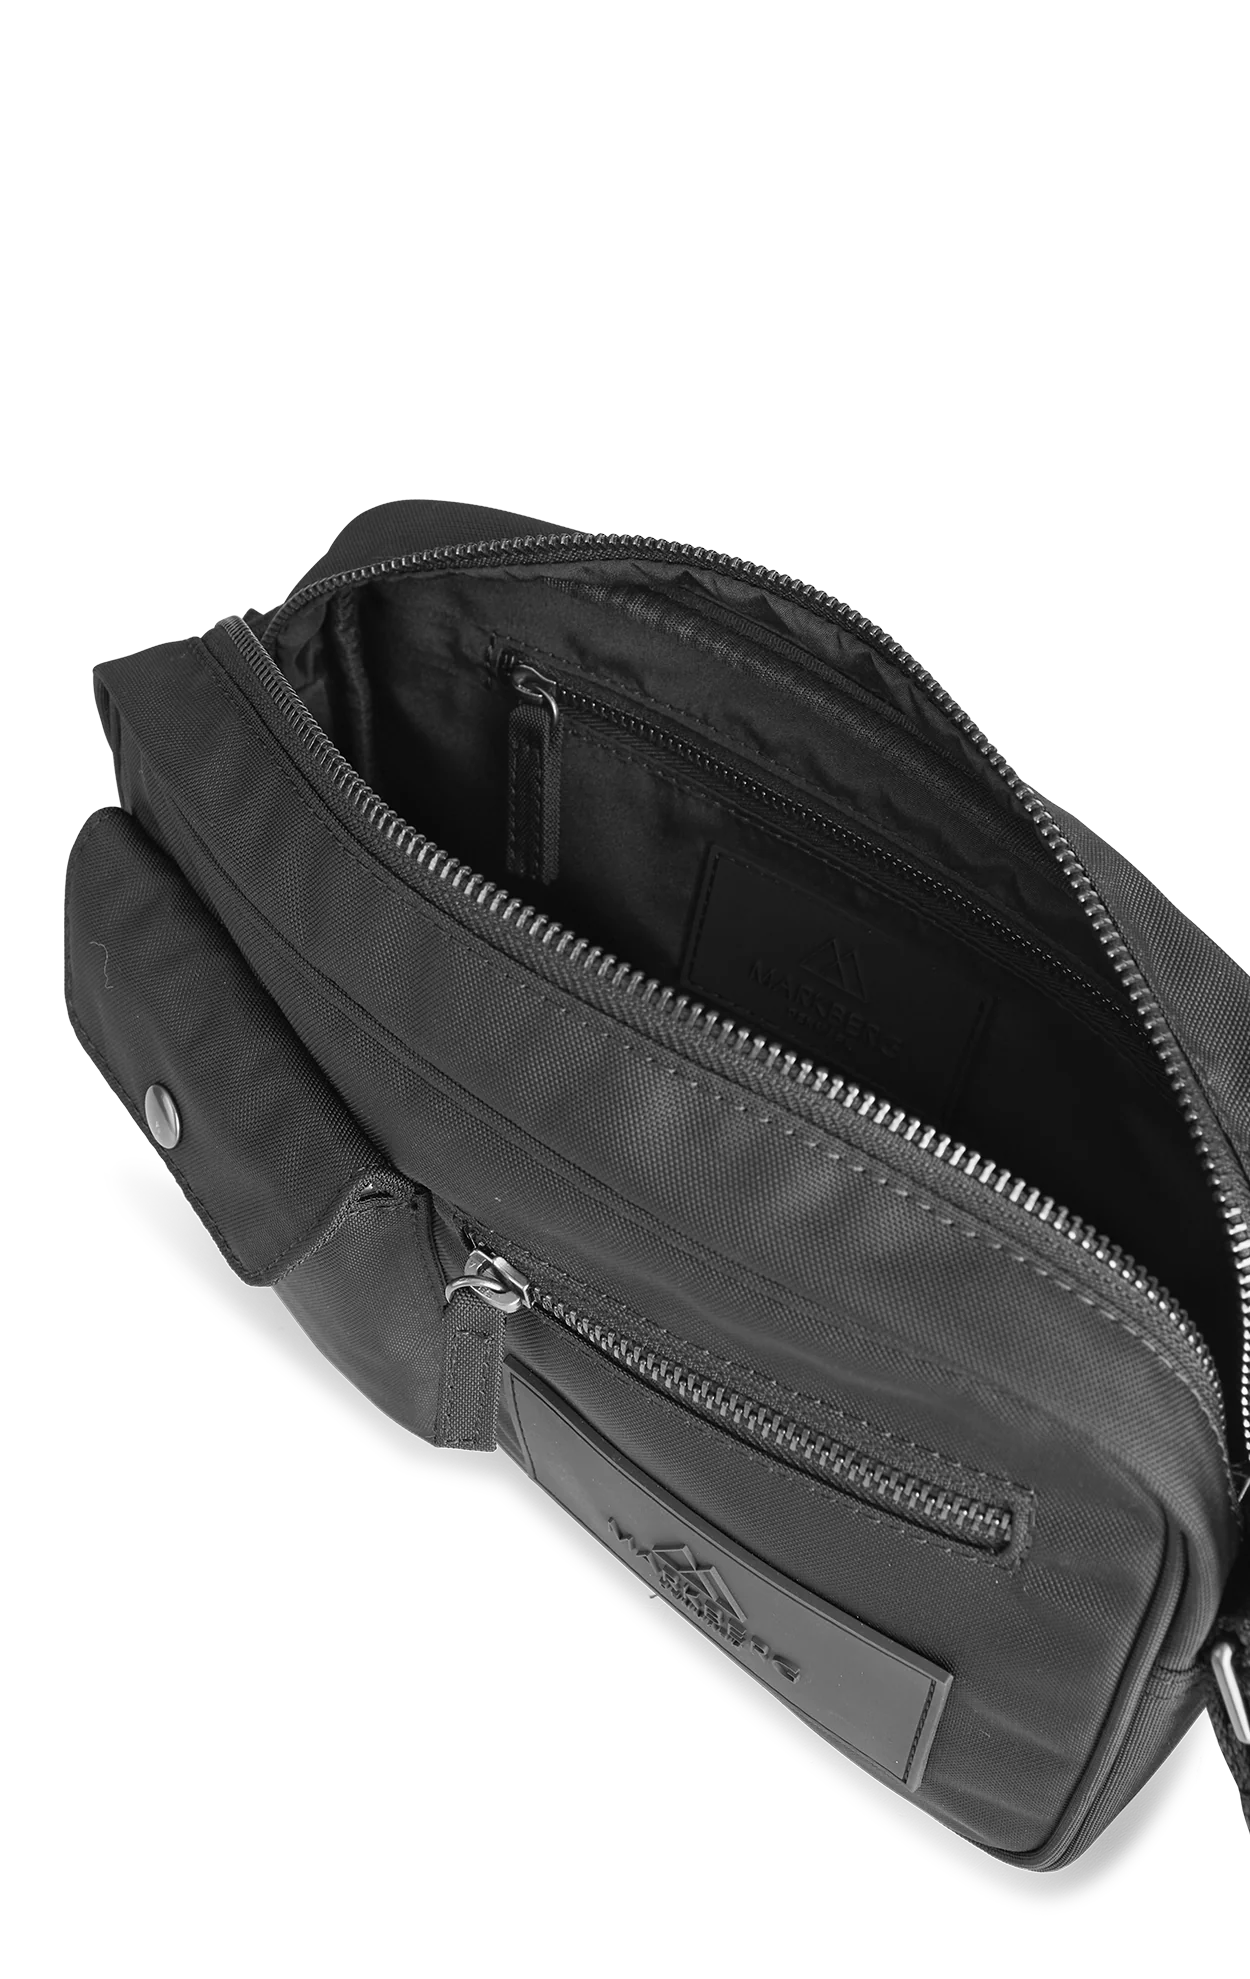 An open black waist bag, known as the Markberg Darla Bum Bag, with zippers on a transparent background, is crafted from vegan materials.